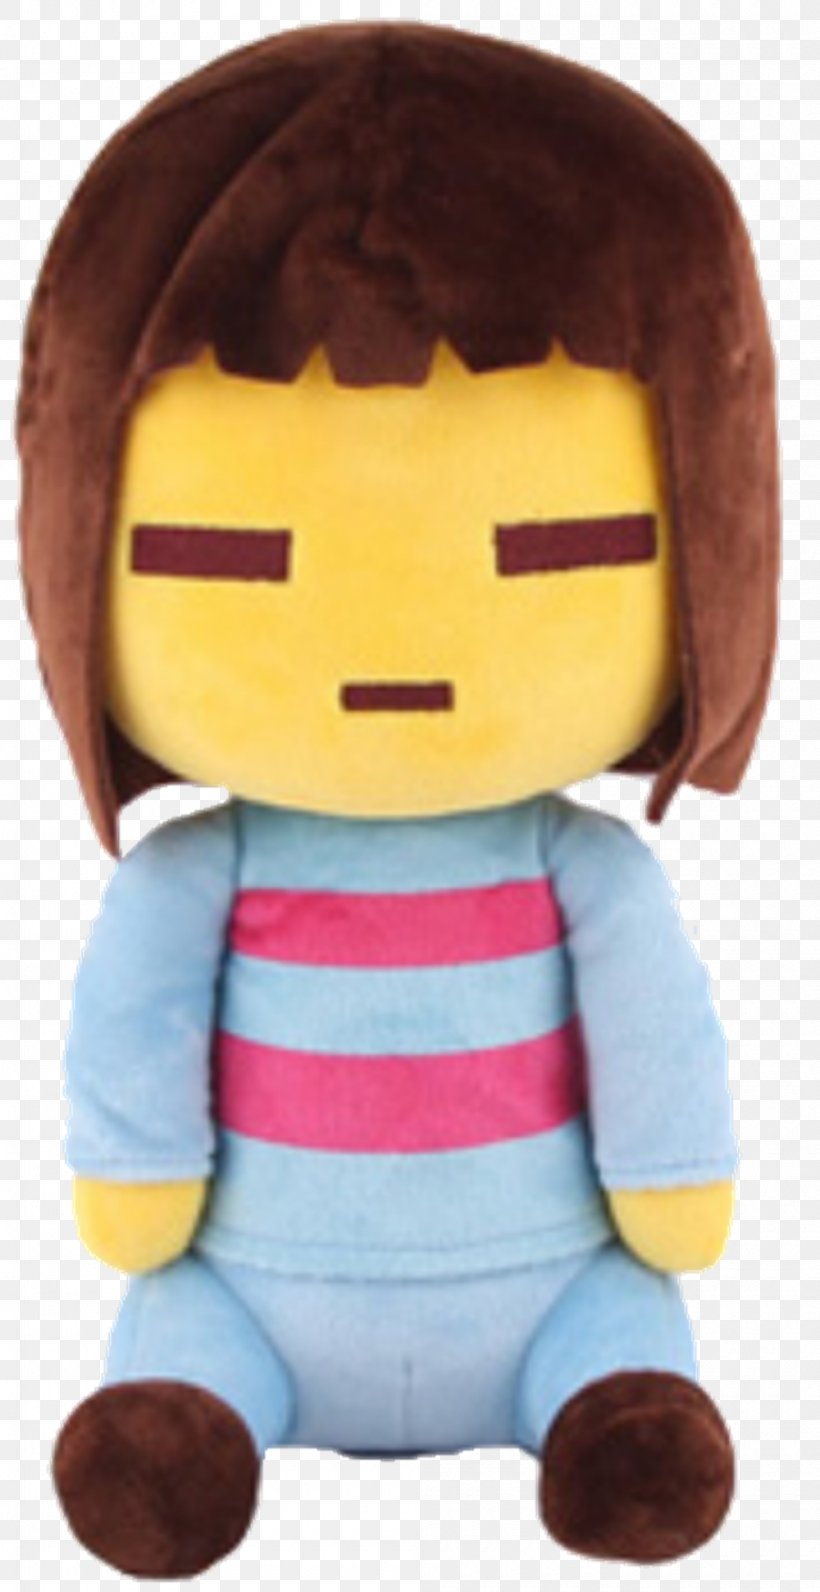 Undertale Stuffed Animals & Cuddly Toys Plush Doll, PNG, 1000x1942px, Undertale, Child, Christmas, Collectable, Doll Download Free